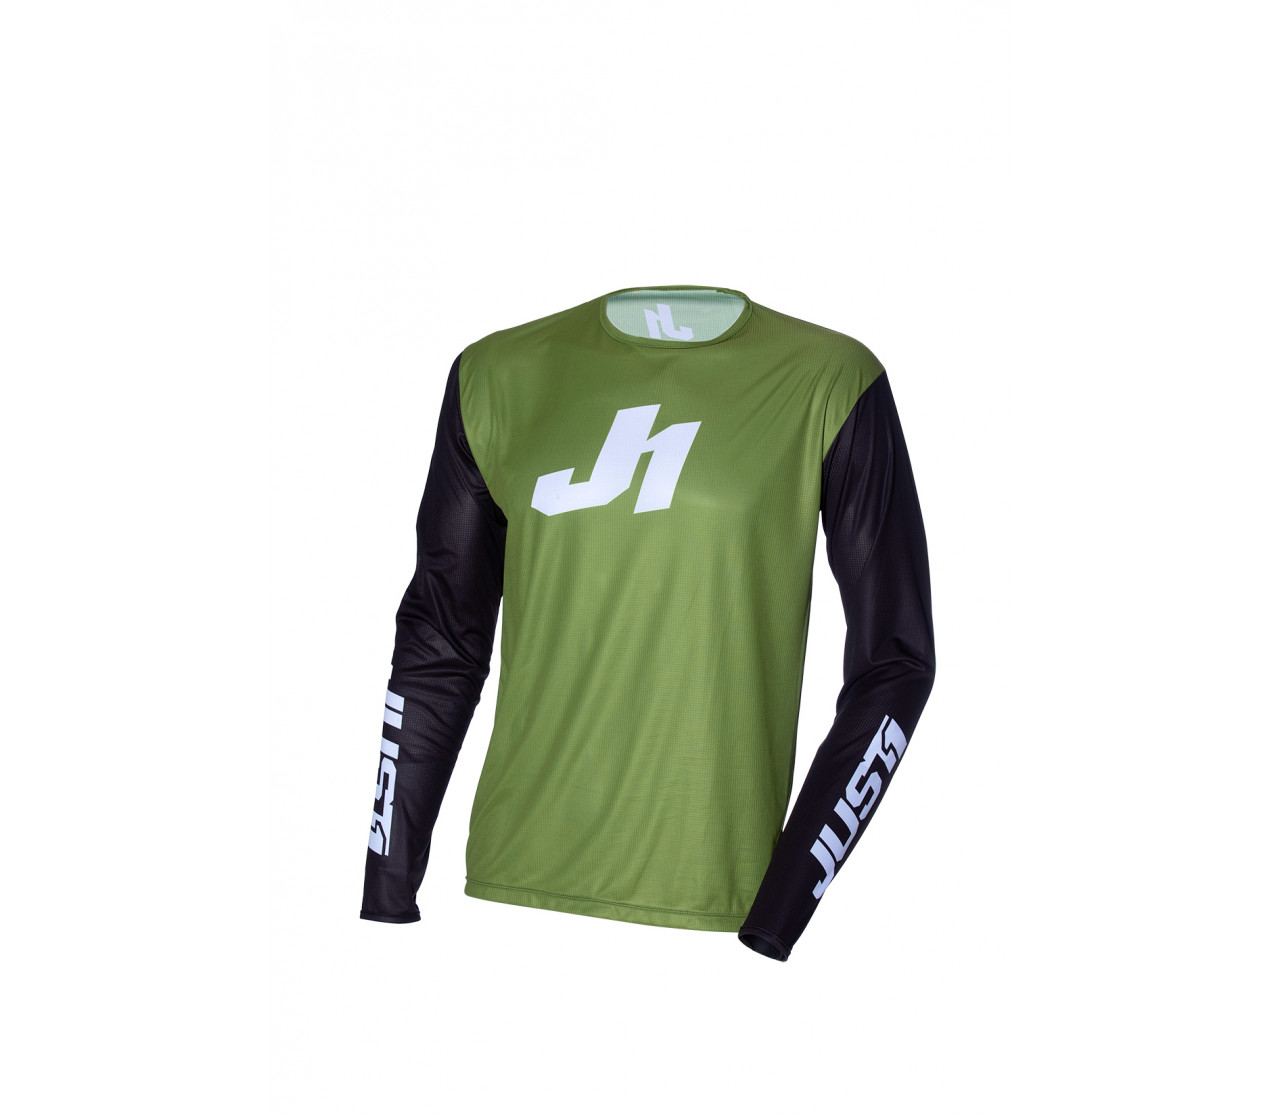 JUST1 JERSEY J-ESSENTIAL YOUTH SOLID ARMY BLACK WHITE